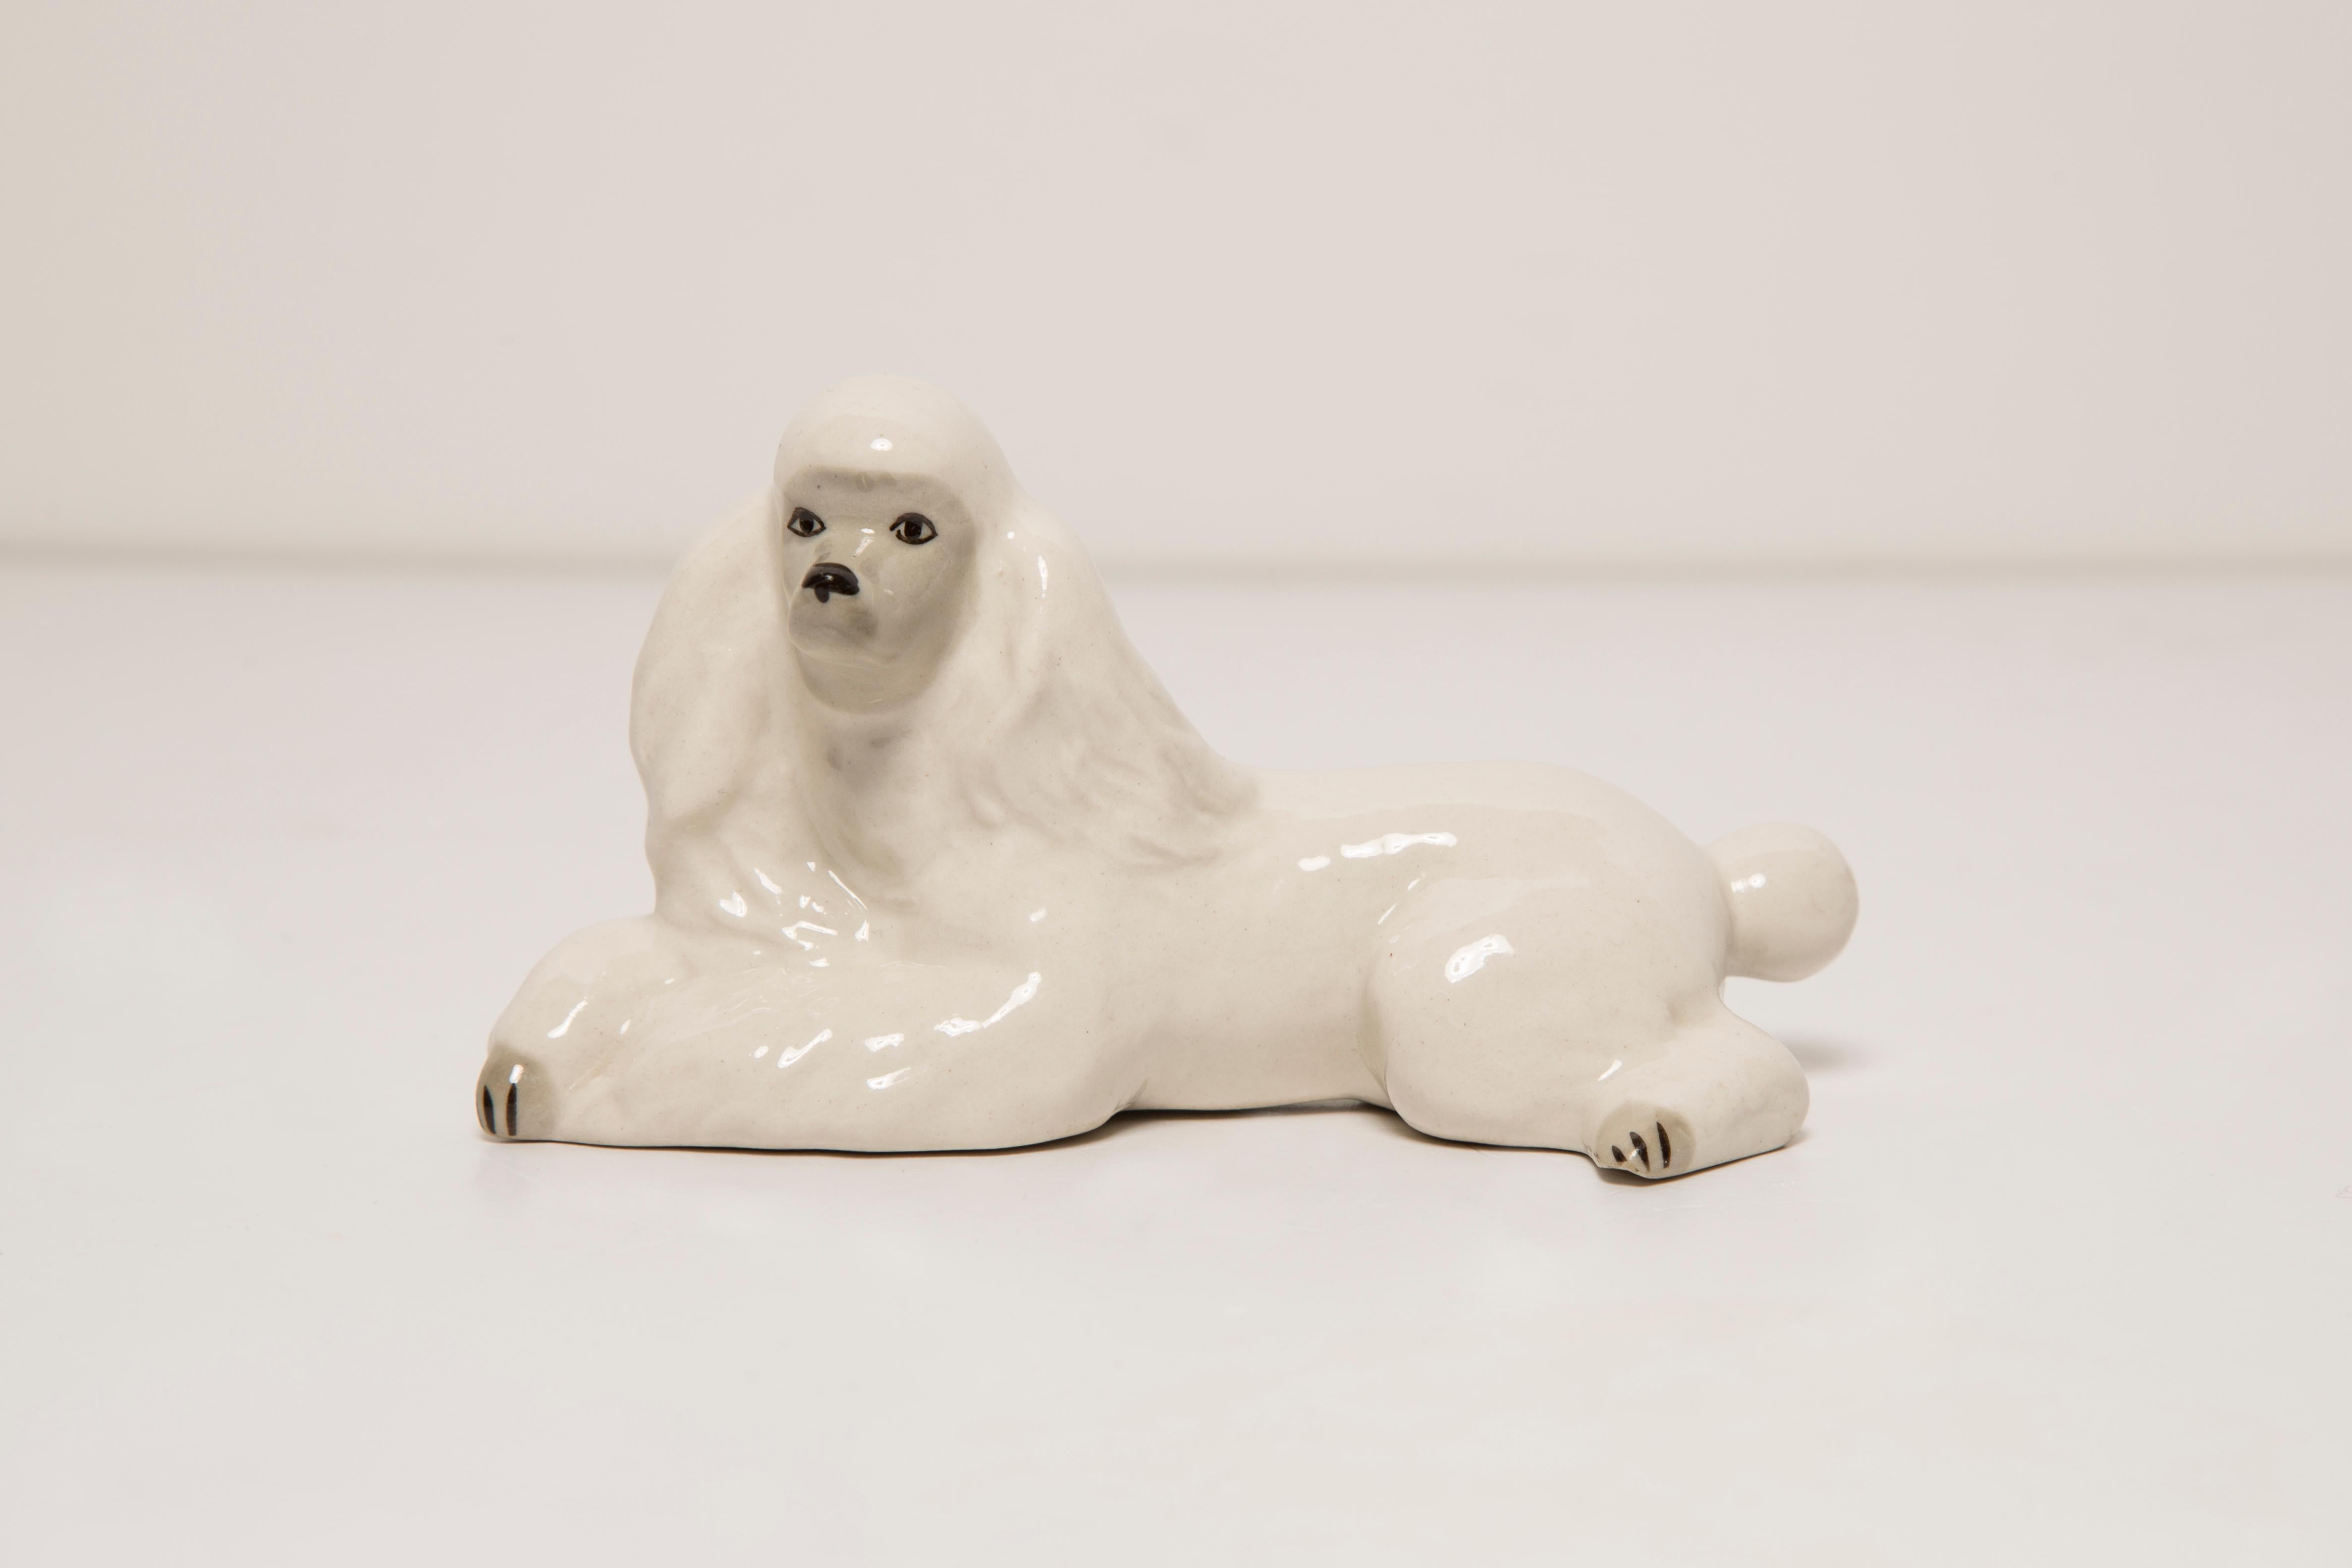 Hand-Painted Midcentury White Poodle Ceramic Dog Sculpture, Europe, 1960s For Sale